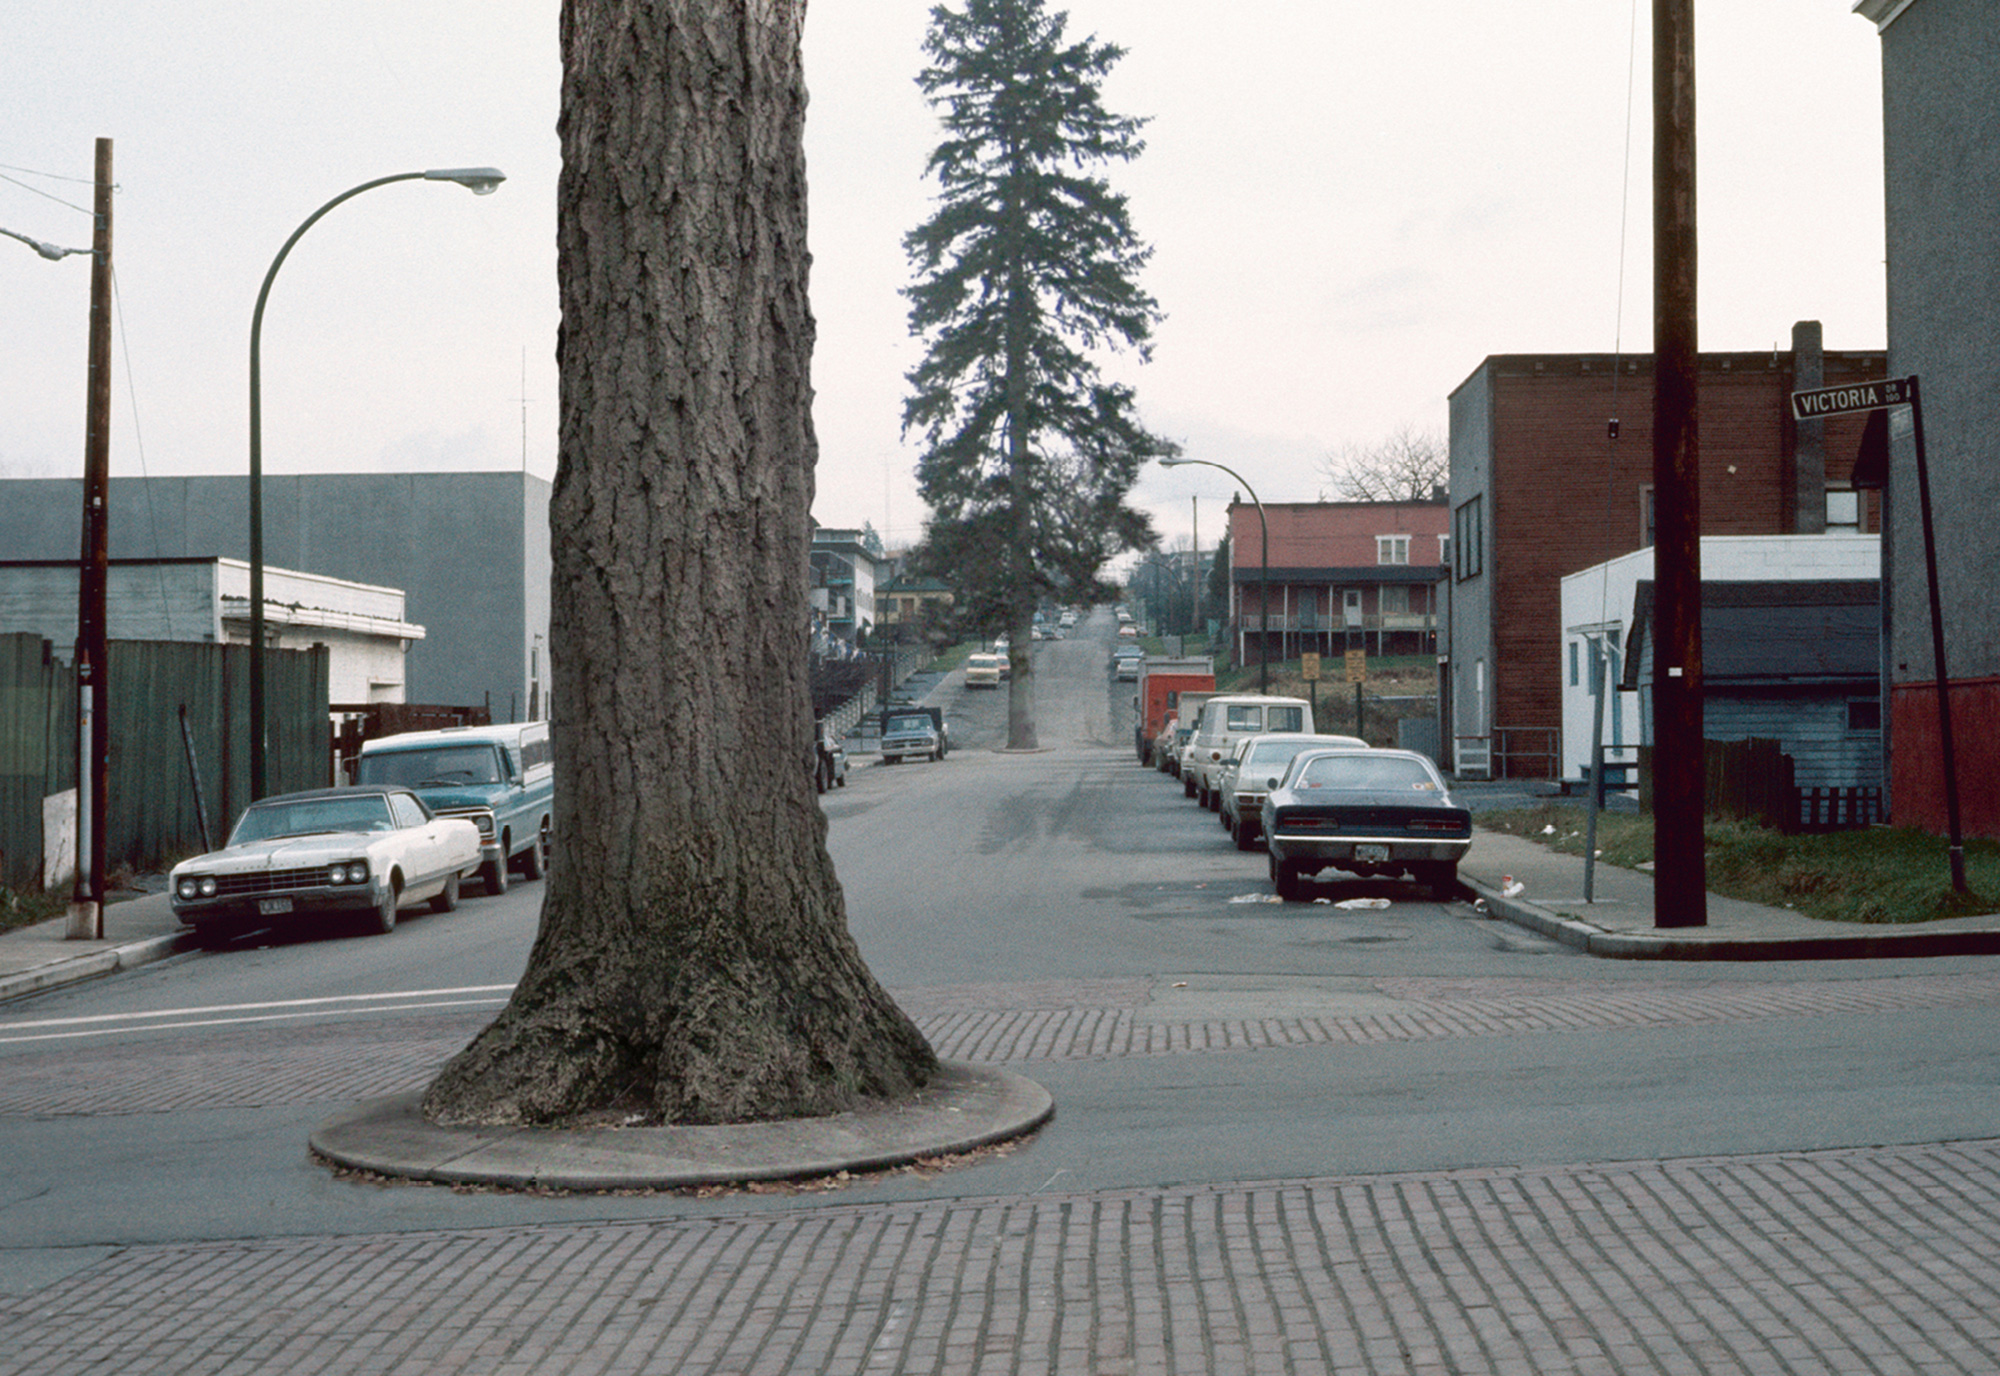 A photograph titled “Roundabout Vancouver: East Vancouver, circa nineteen seventies.” It shows a tree in a sidewalk.